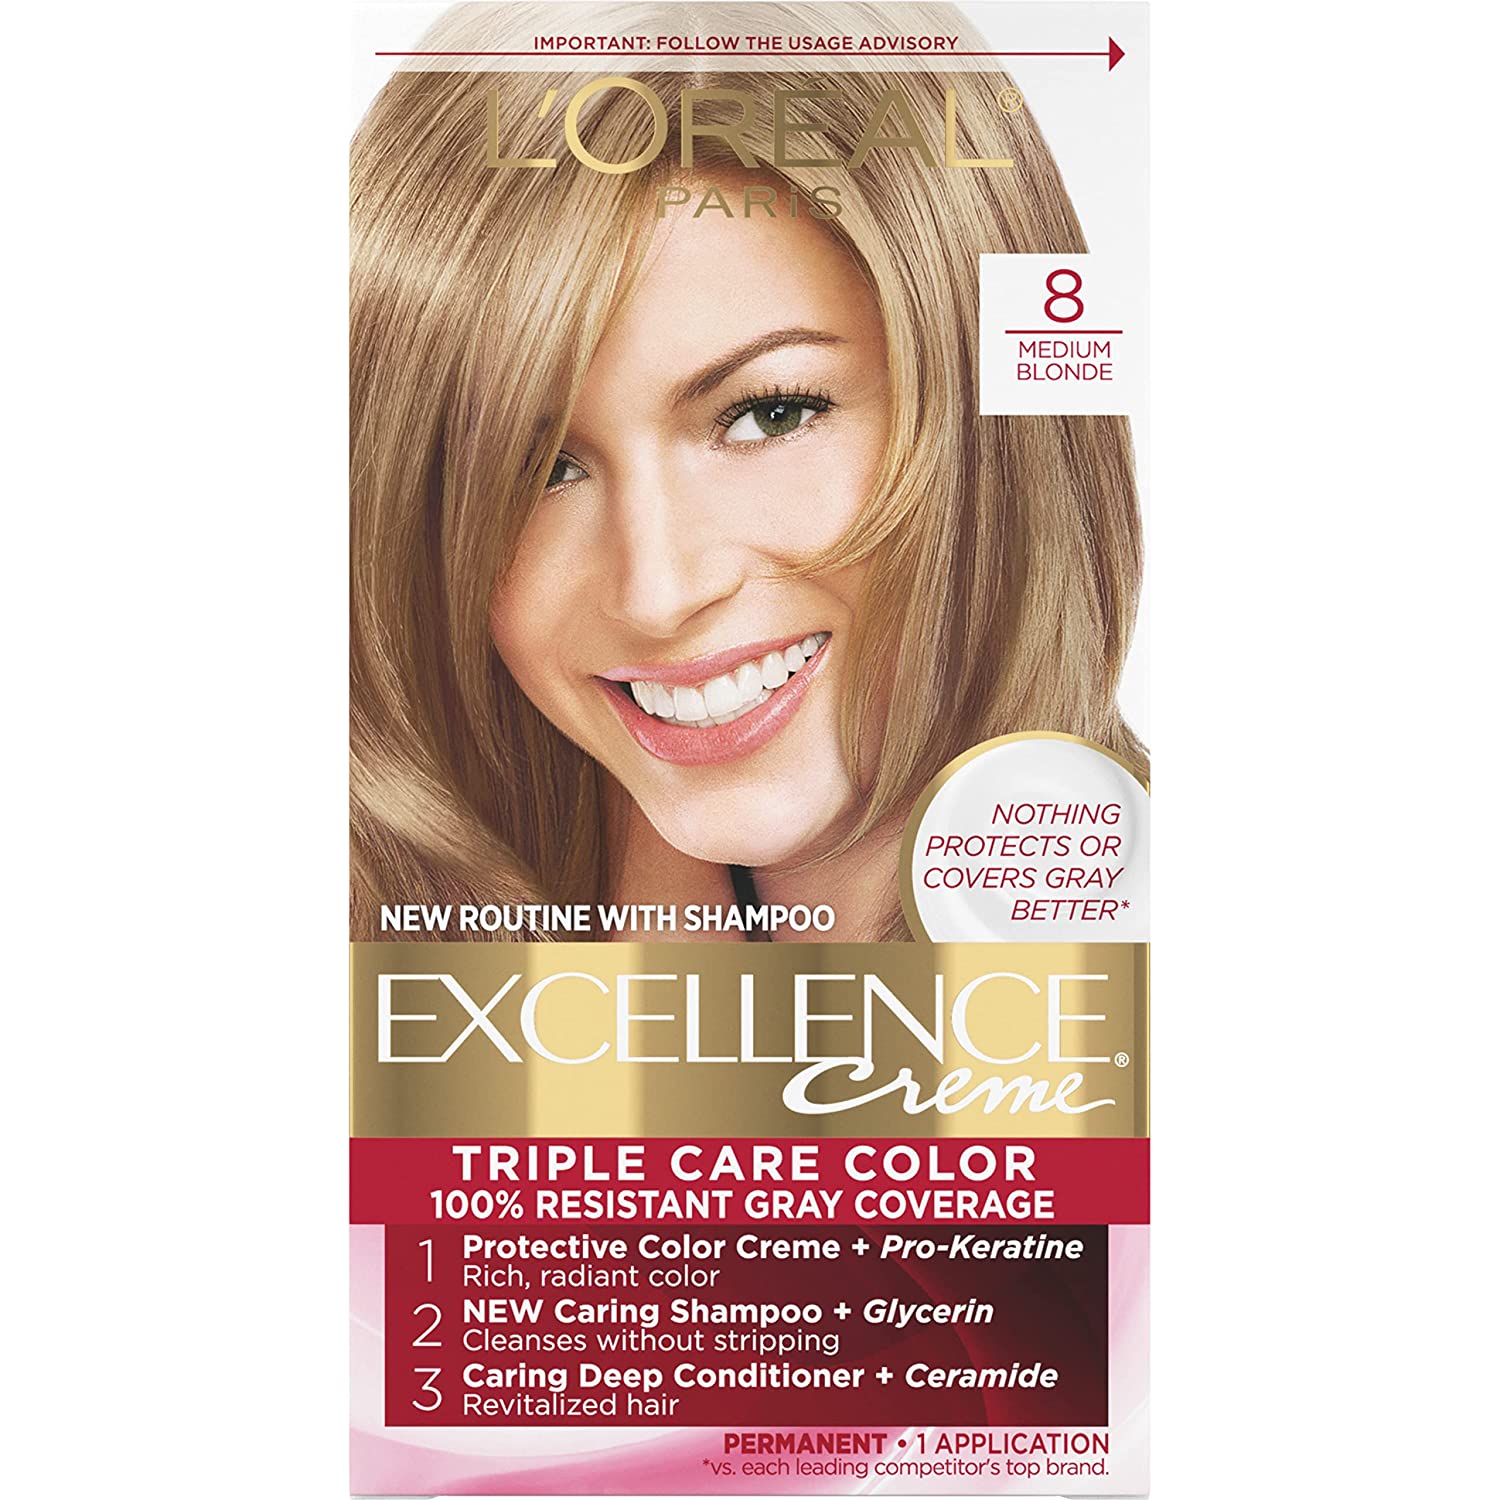 L'Oreal Paris Excellence Creme Permanent Triple Care Hair Color, Gray Coverage For Up to 8 Weeks, All Hair Types - 8 Medium Blonde